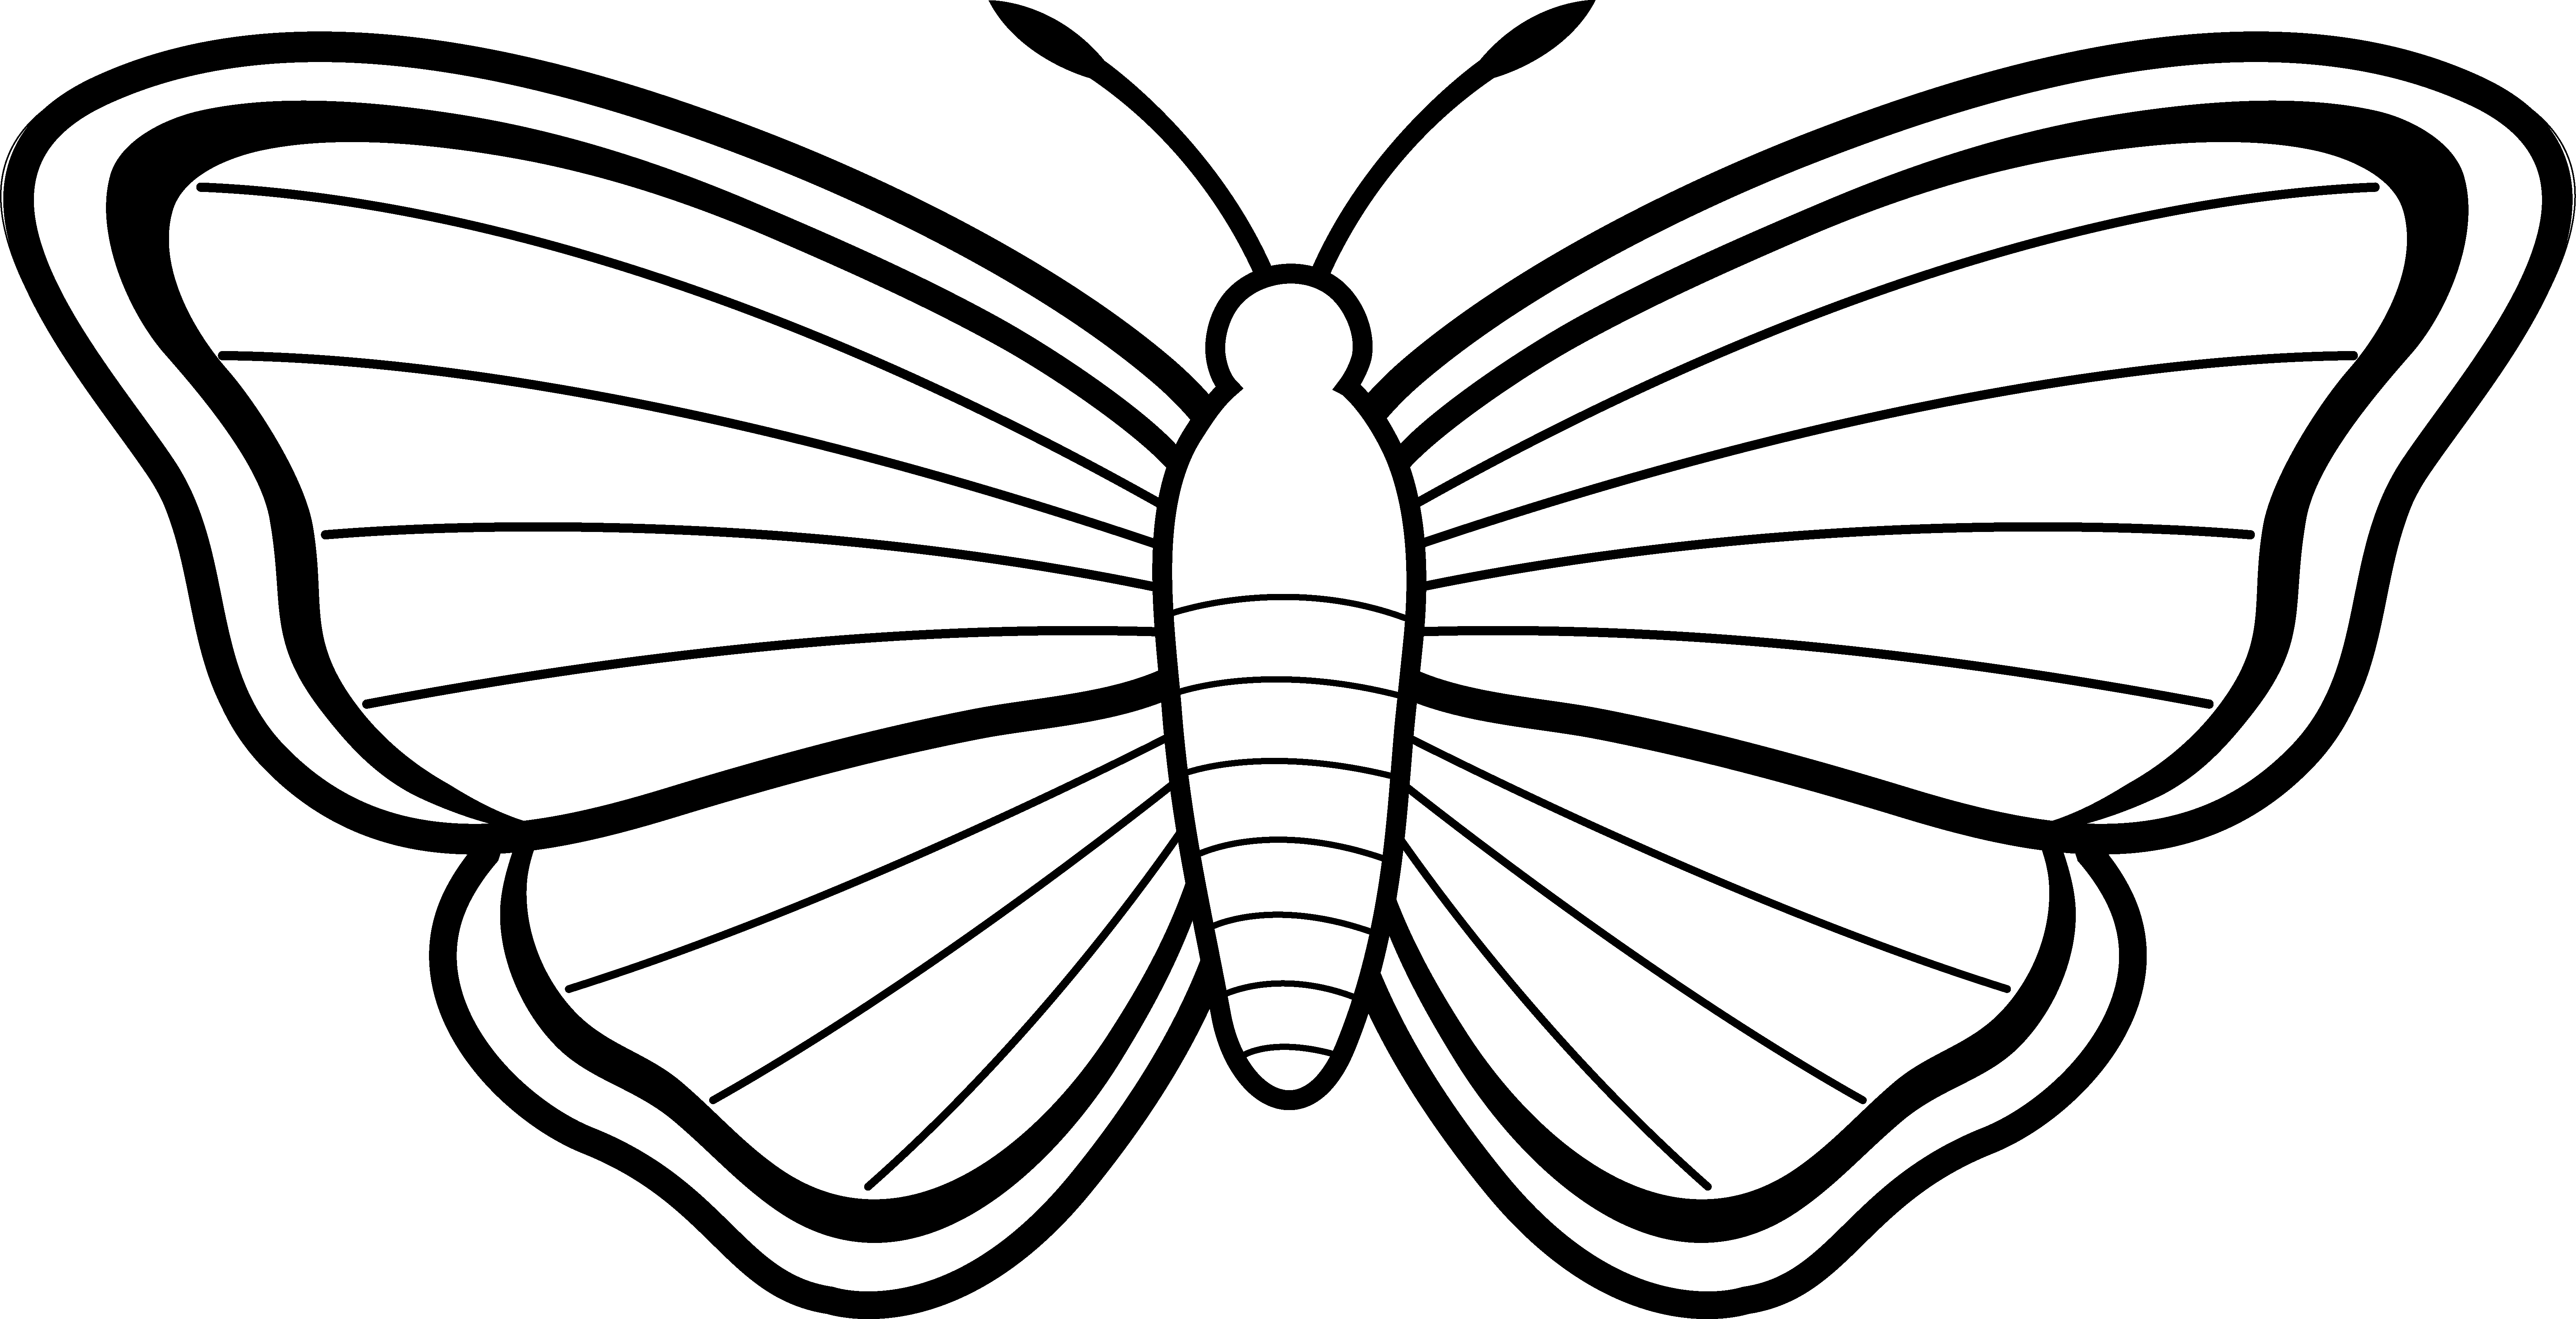 Butterfly Black and White Logo - Free Butterflies Black And White Outline, Download Free Clip Art ...